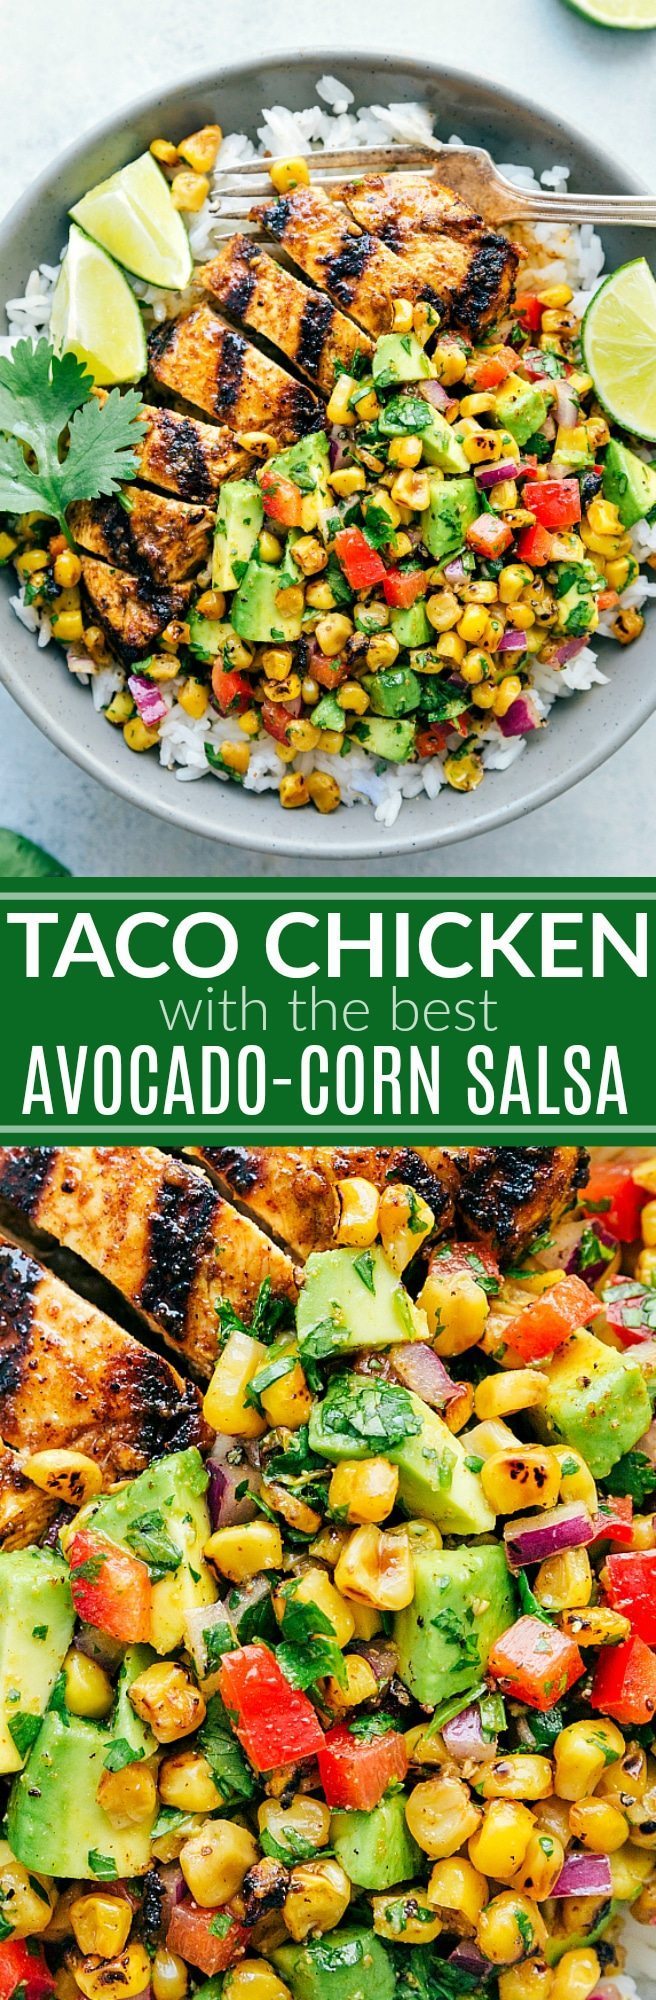 The BEST marinated TACO CHICKEN with an amazing avocado grilled corn salsa! Delicious and healthy! via chelseasmessyapron.com